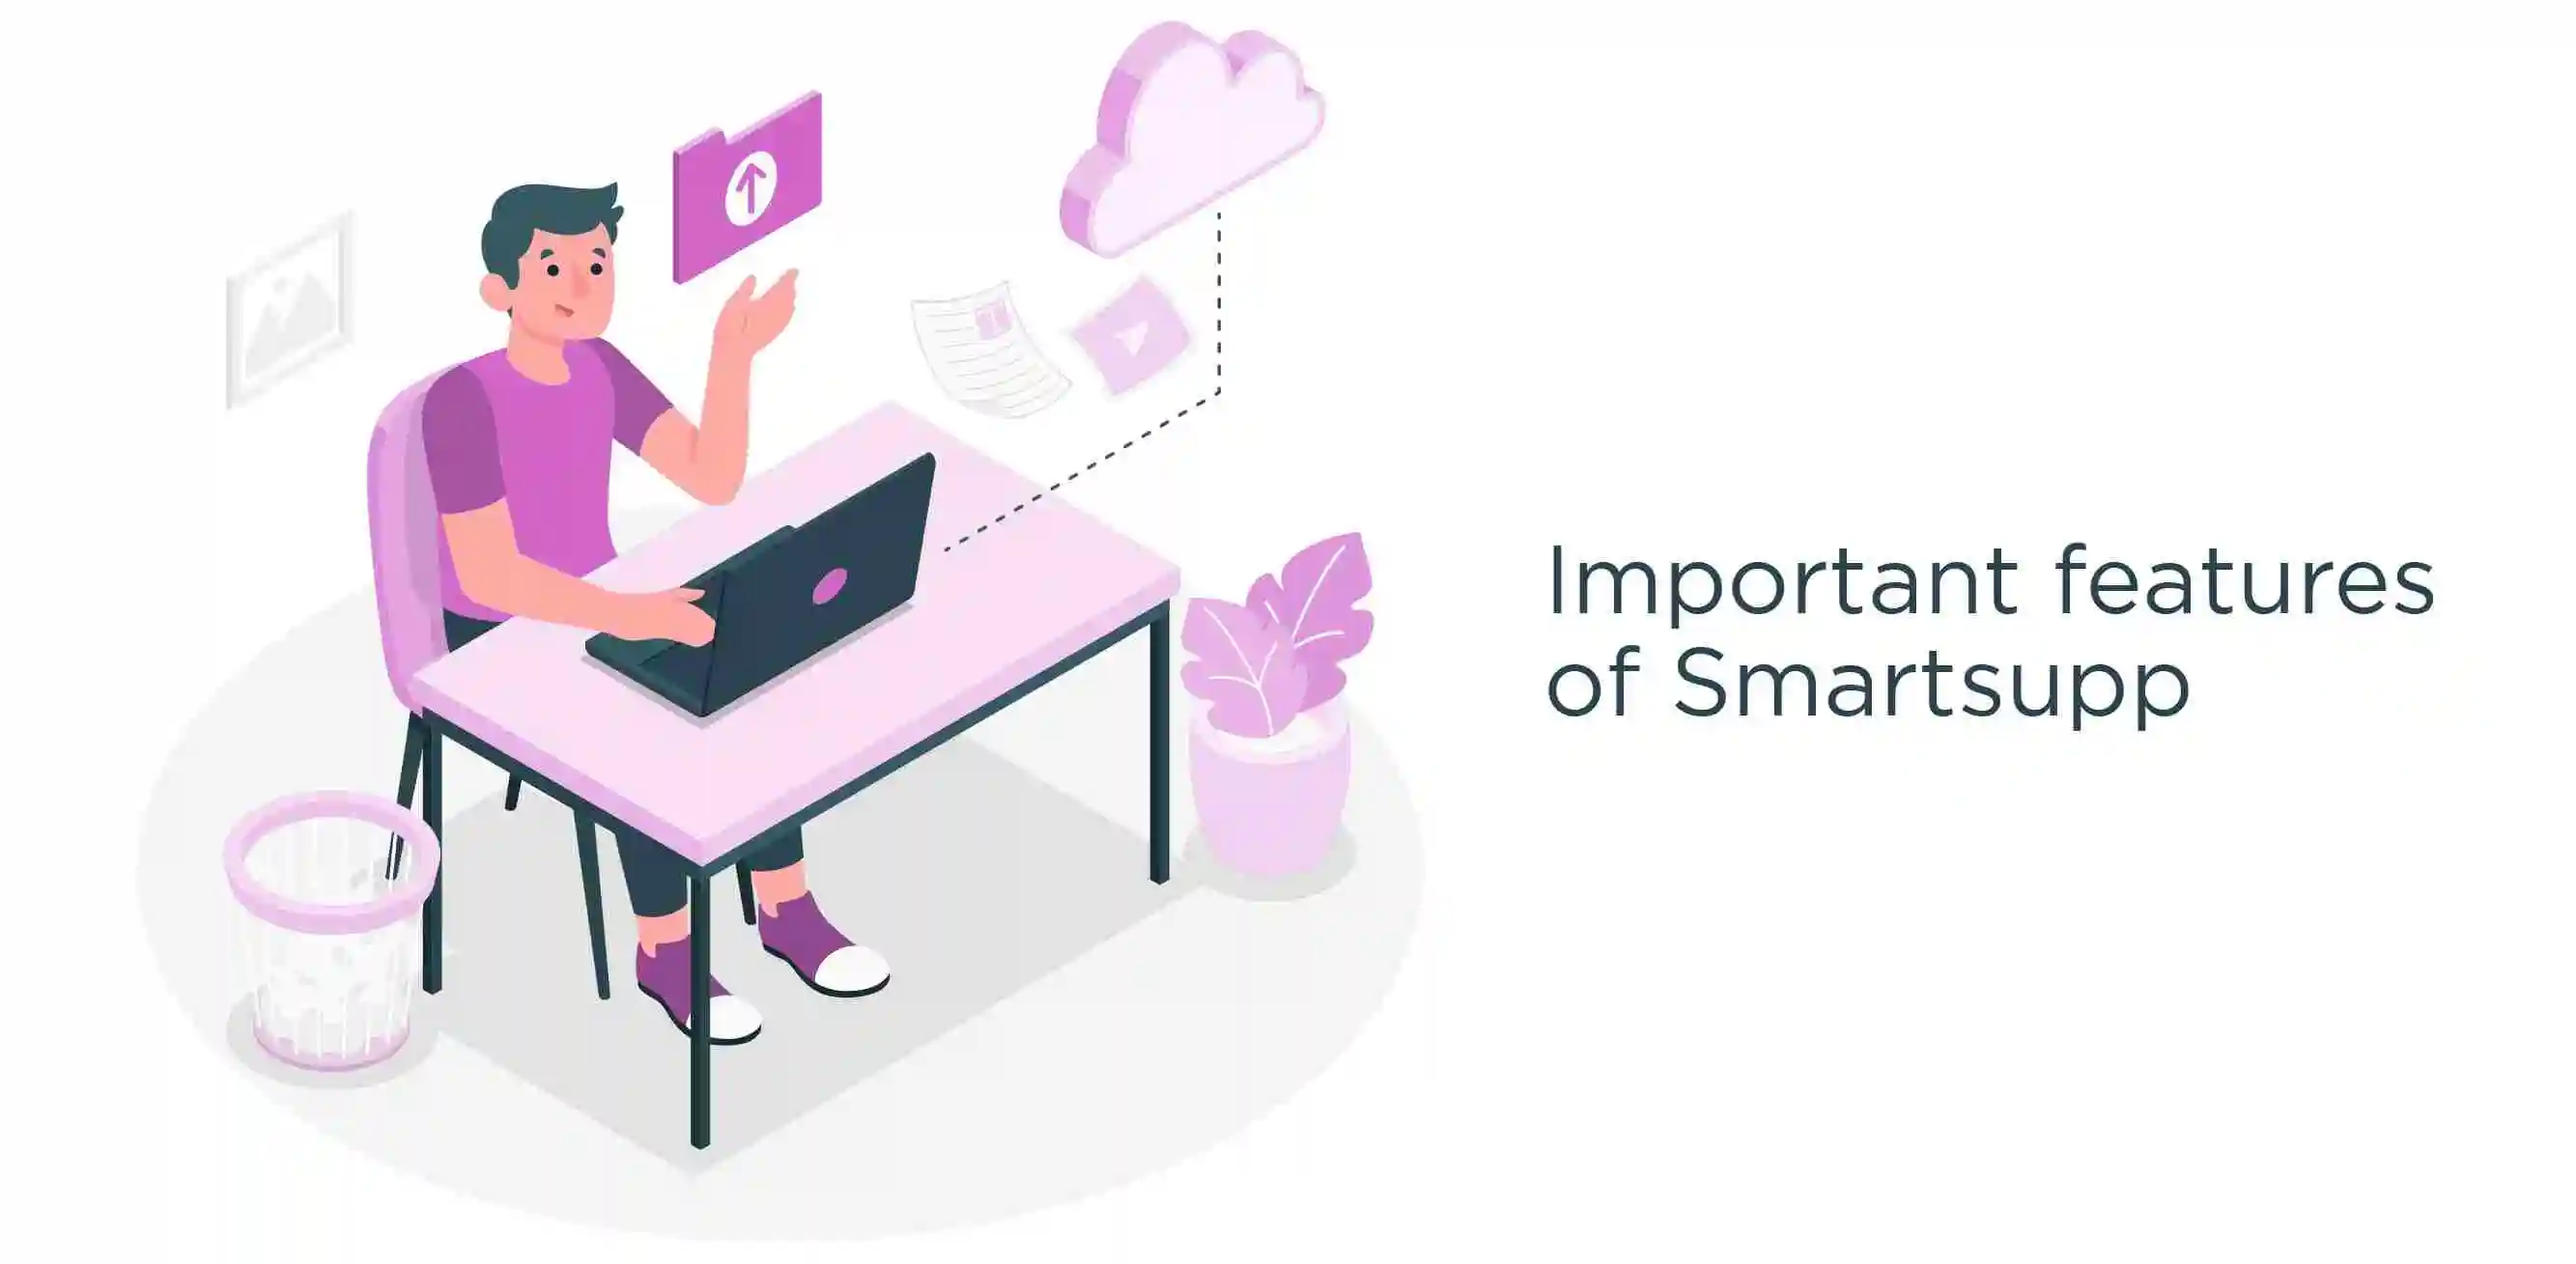 Important features of Smartsupp